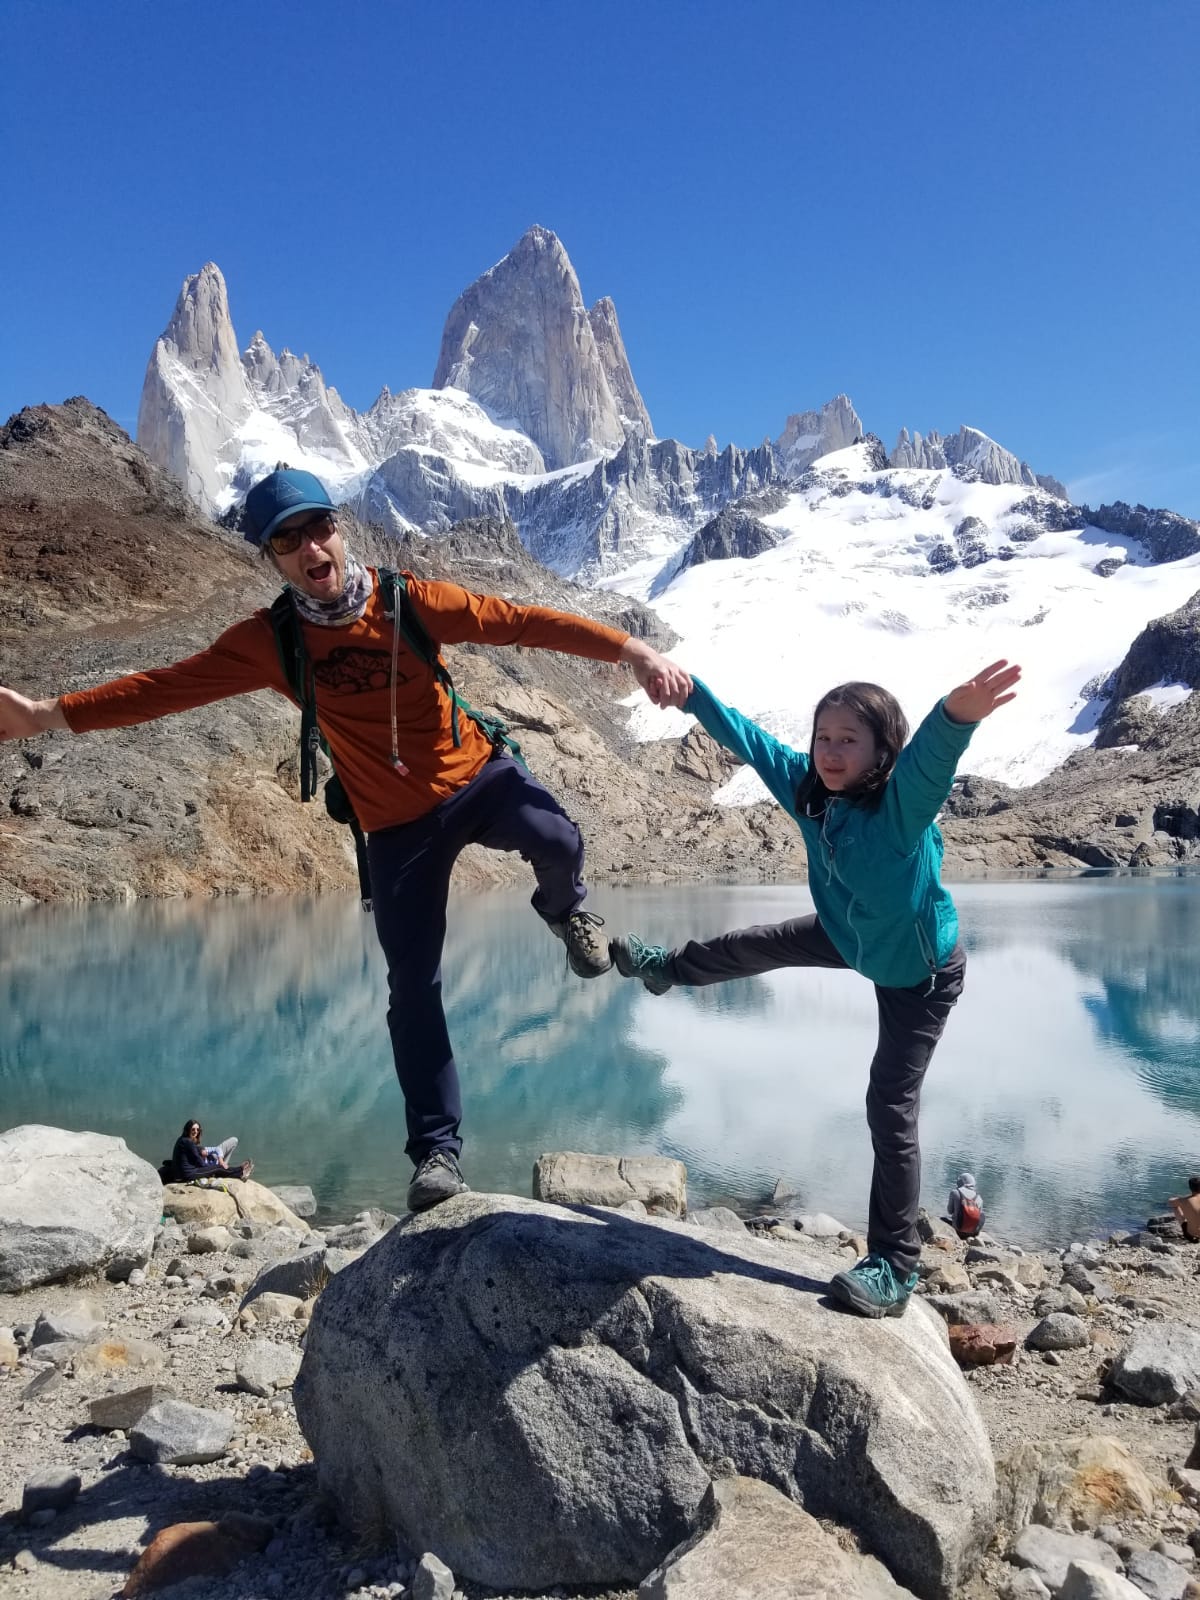 The Bailey family was approximately halfway through a three-month trip across South America when they were caught in the COVID-19 lockdown in Peru. Andrew Bailey, a professor at University of Tennessee Chattanooga, poses with daughter Anya, 8, at Parque Nacional Los Glaciers in Patagonia, Argentina.